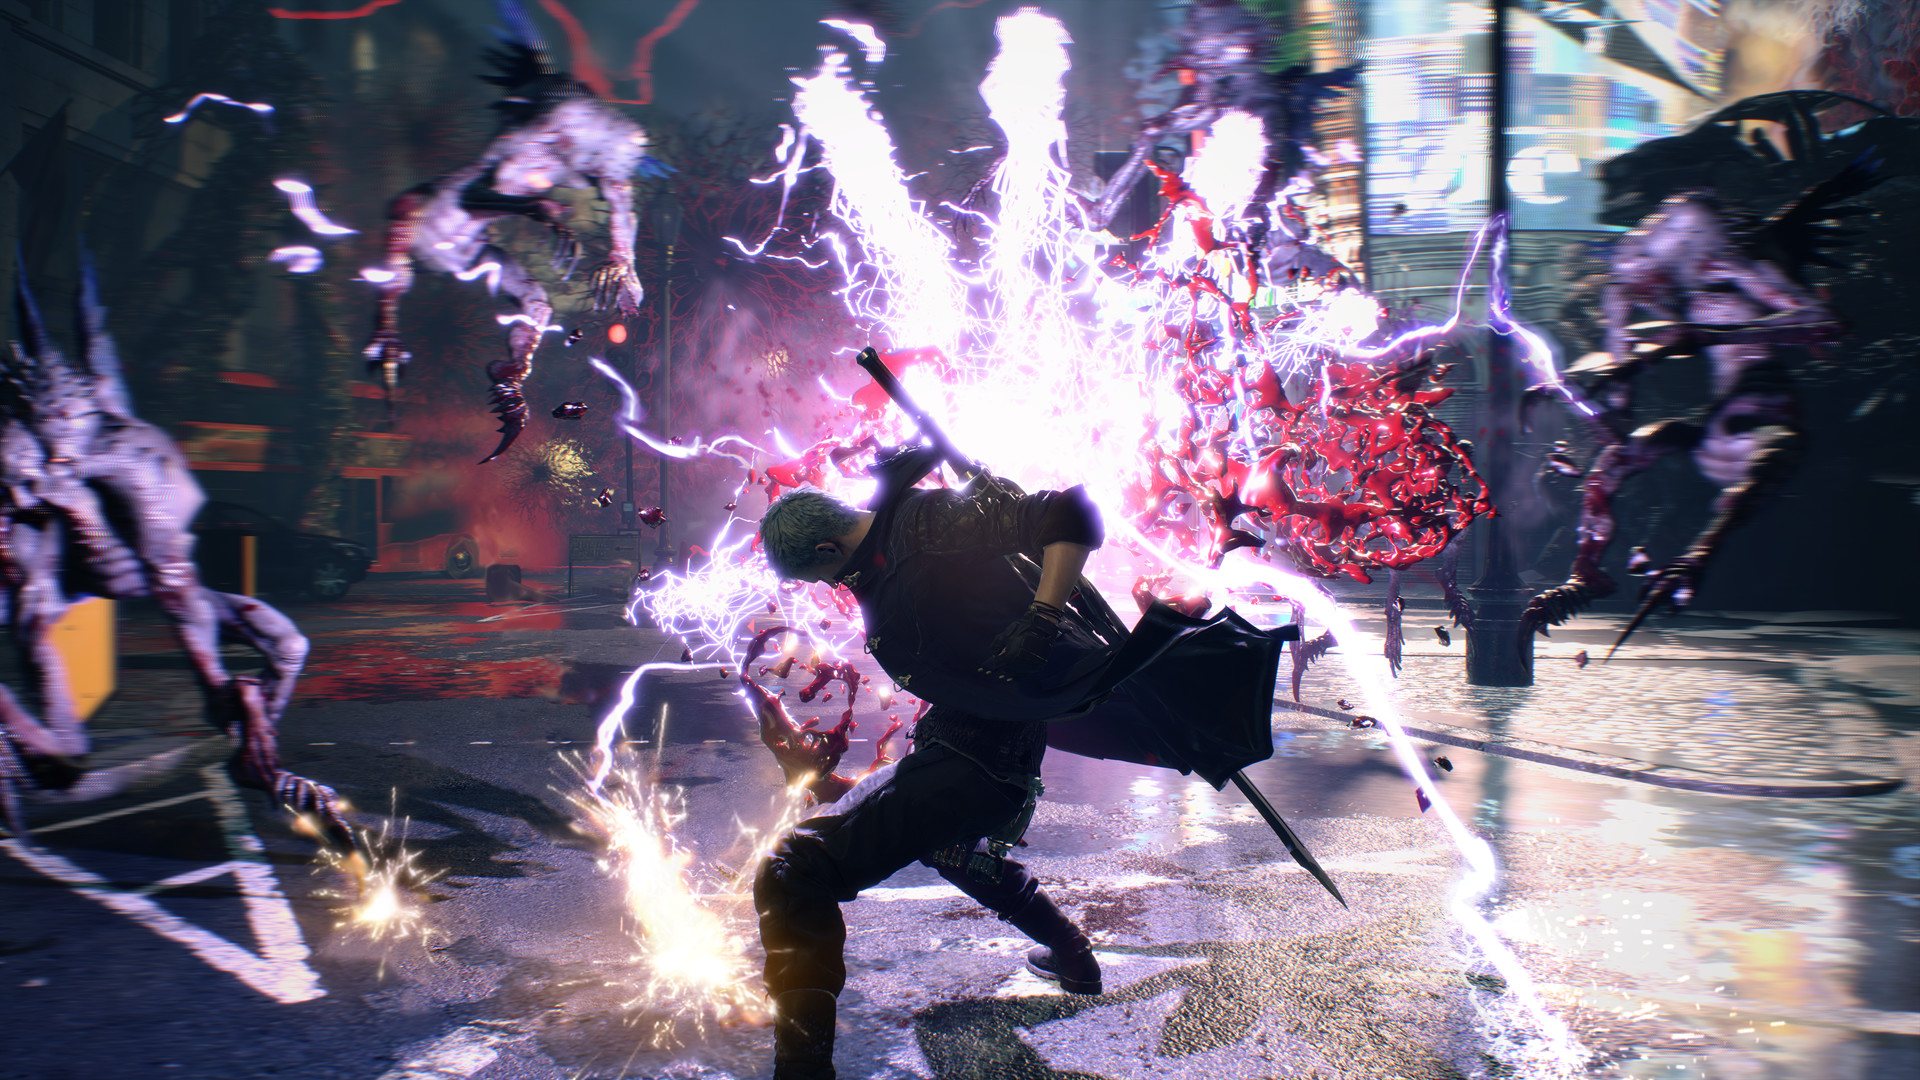 Devil May Cry 5 + Playable Character: Vergil DLC Steam CD Key, $7.66